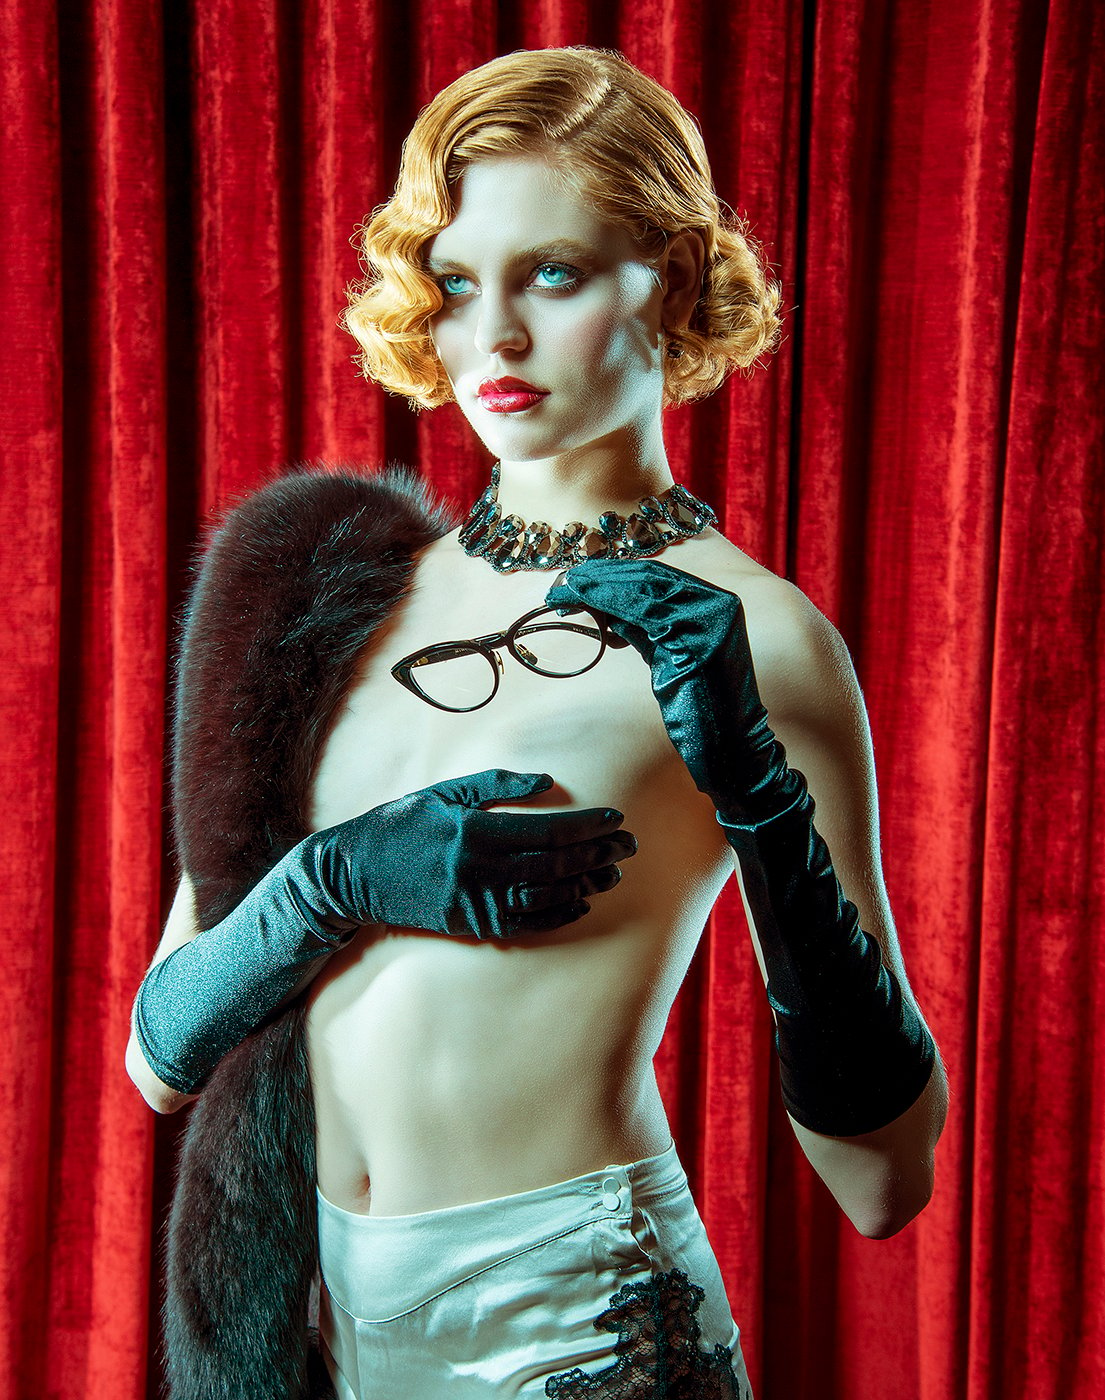 Woman with strawberry blonde pin curls and red lipstick holds cat-eye glasses. She is topless, but is wearing 1920s accessories and covers her chest with one hand clad in long black satin gloves. Shot by Greg Miles for Dita Eyewear